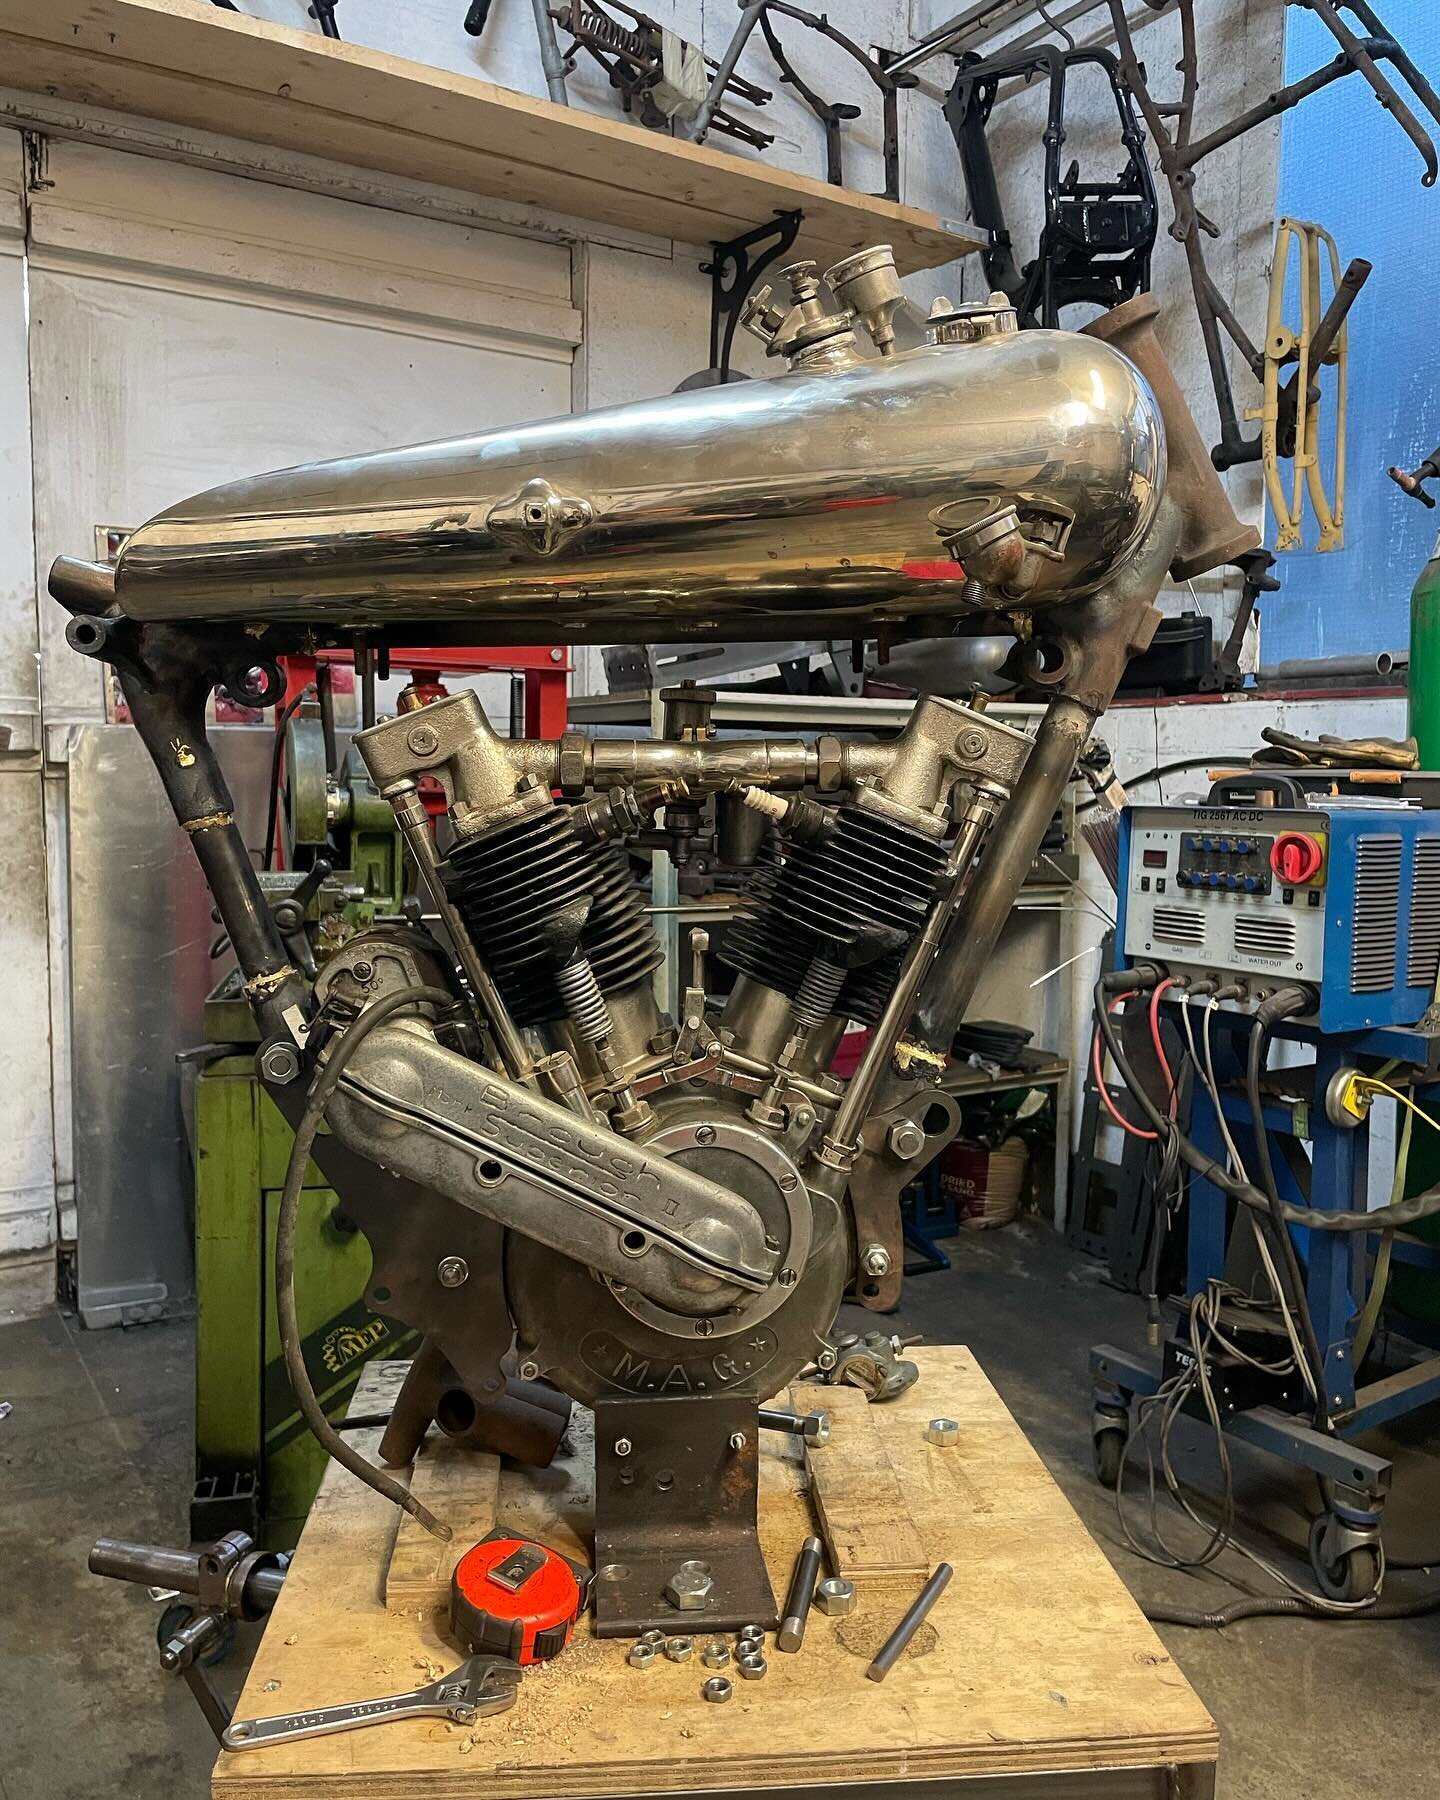 This Mk11 Brough Superior is coming along, just some engine plates to do and some ancillary lugs to attach and the new front frame section will be ready for the rear triangle to be built up.. 
#jakerobbinsvintageengineering #vintagemotorcycle #brough